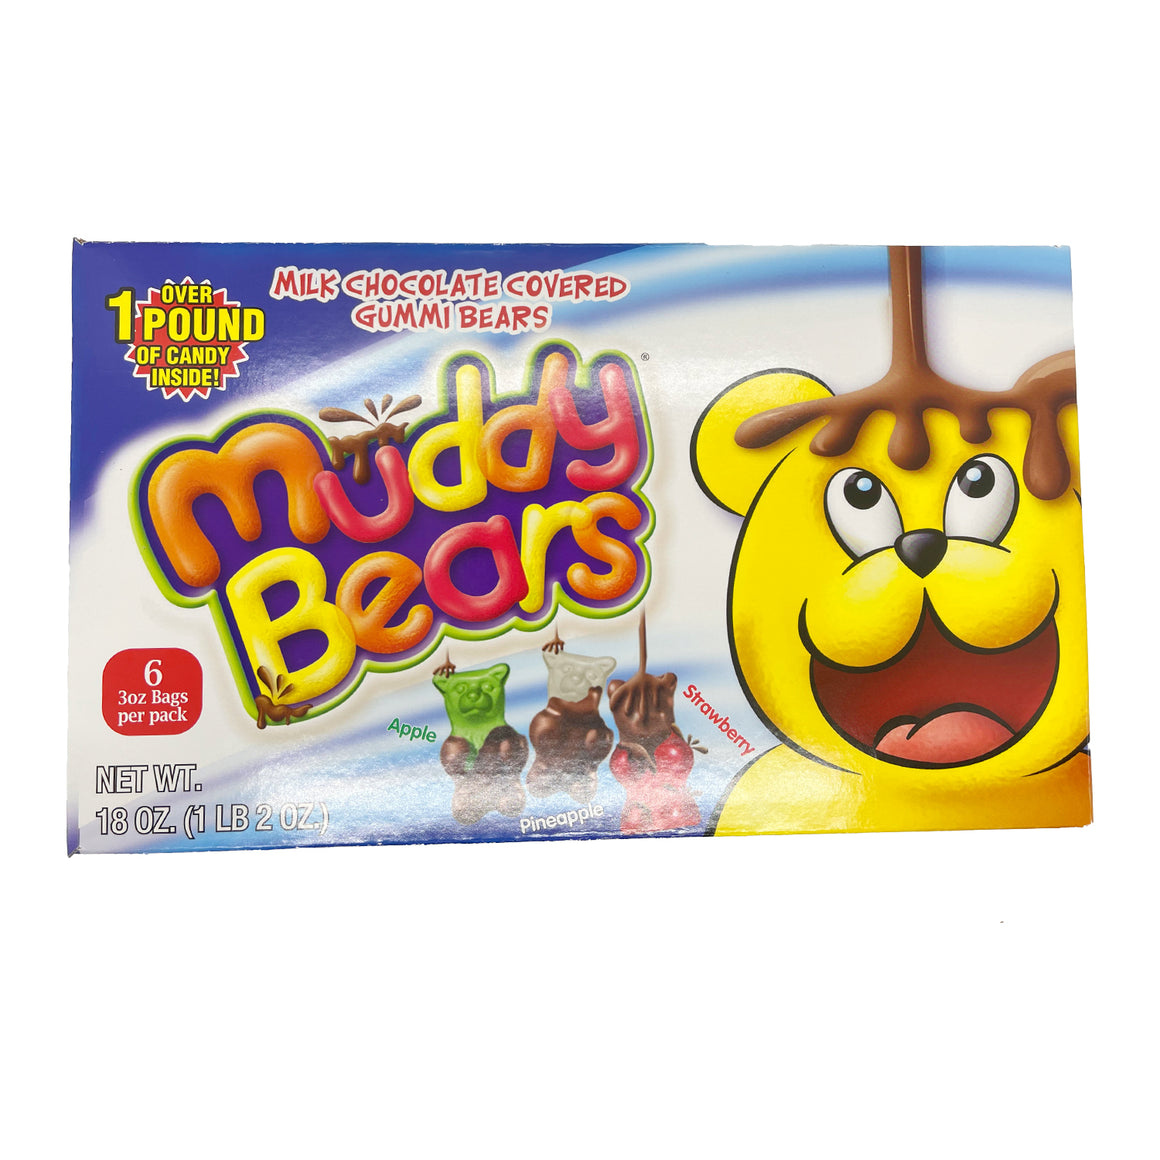 All City Candy Ginormous Muddy Bears 18 oz. Gift Box Gummi Taste of Nature Inc. For fresh candy and great service, visit www.allcitycandy.com